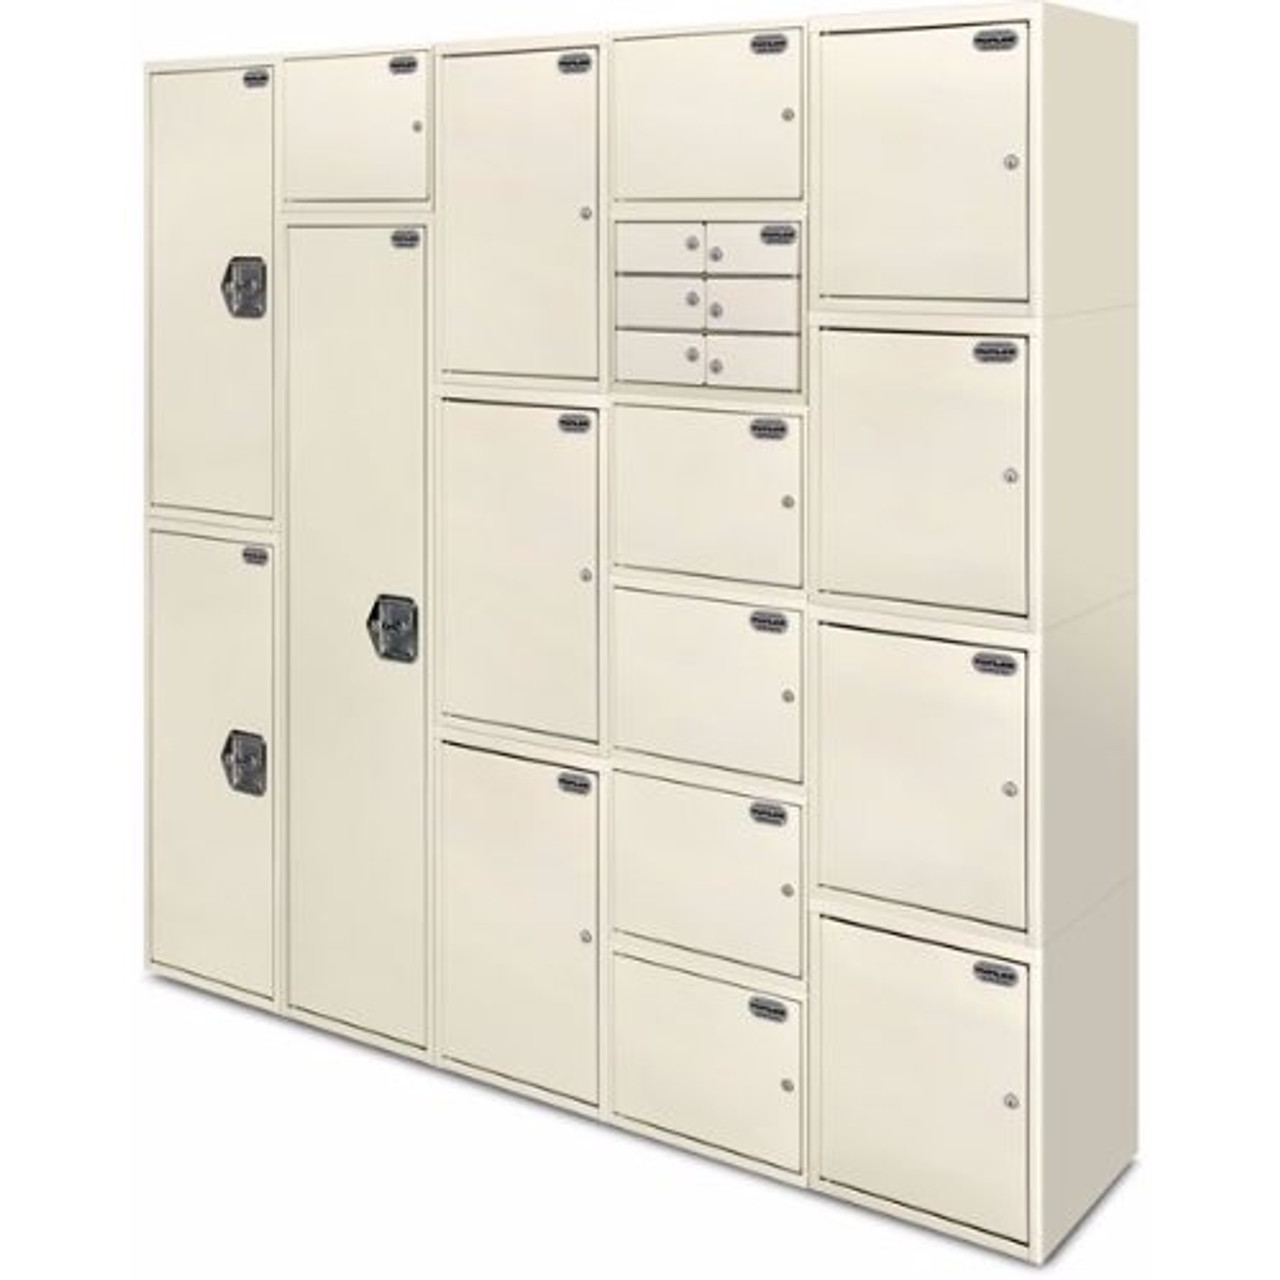 Tufloc 73-890 Modubox Locker, 15x60x18, Stackable, Can Be Ordered In Any Configuration With Tufloc Lockers And Lockboxes, Available In Numbered Lockers And Master Keyed Systems